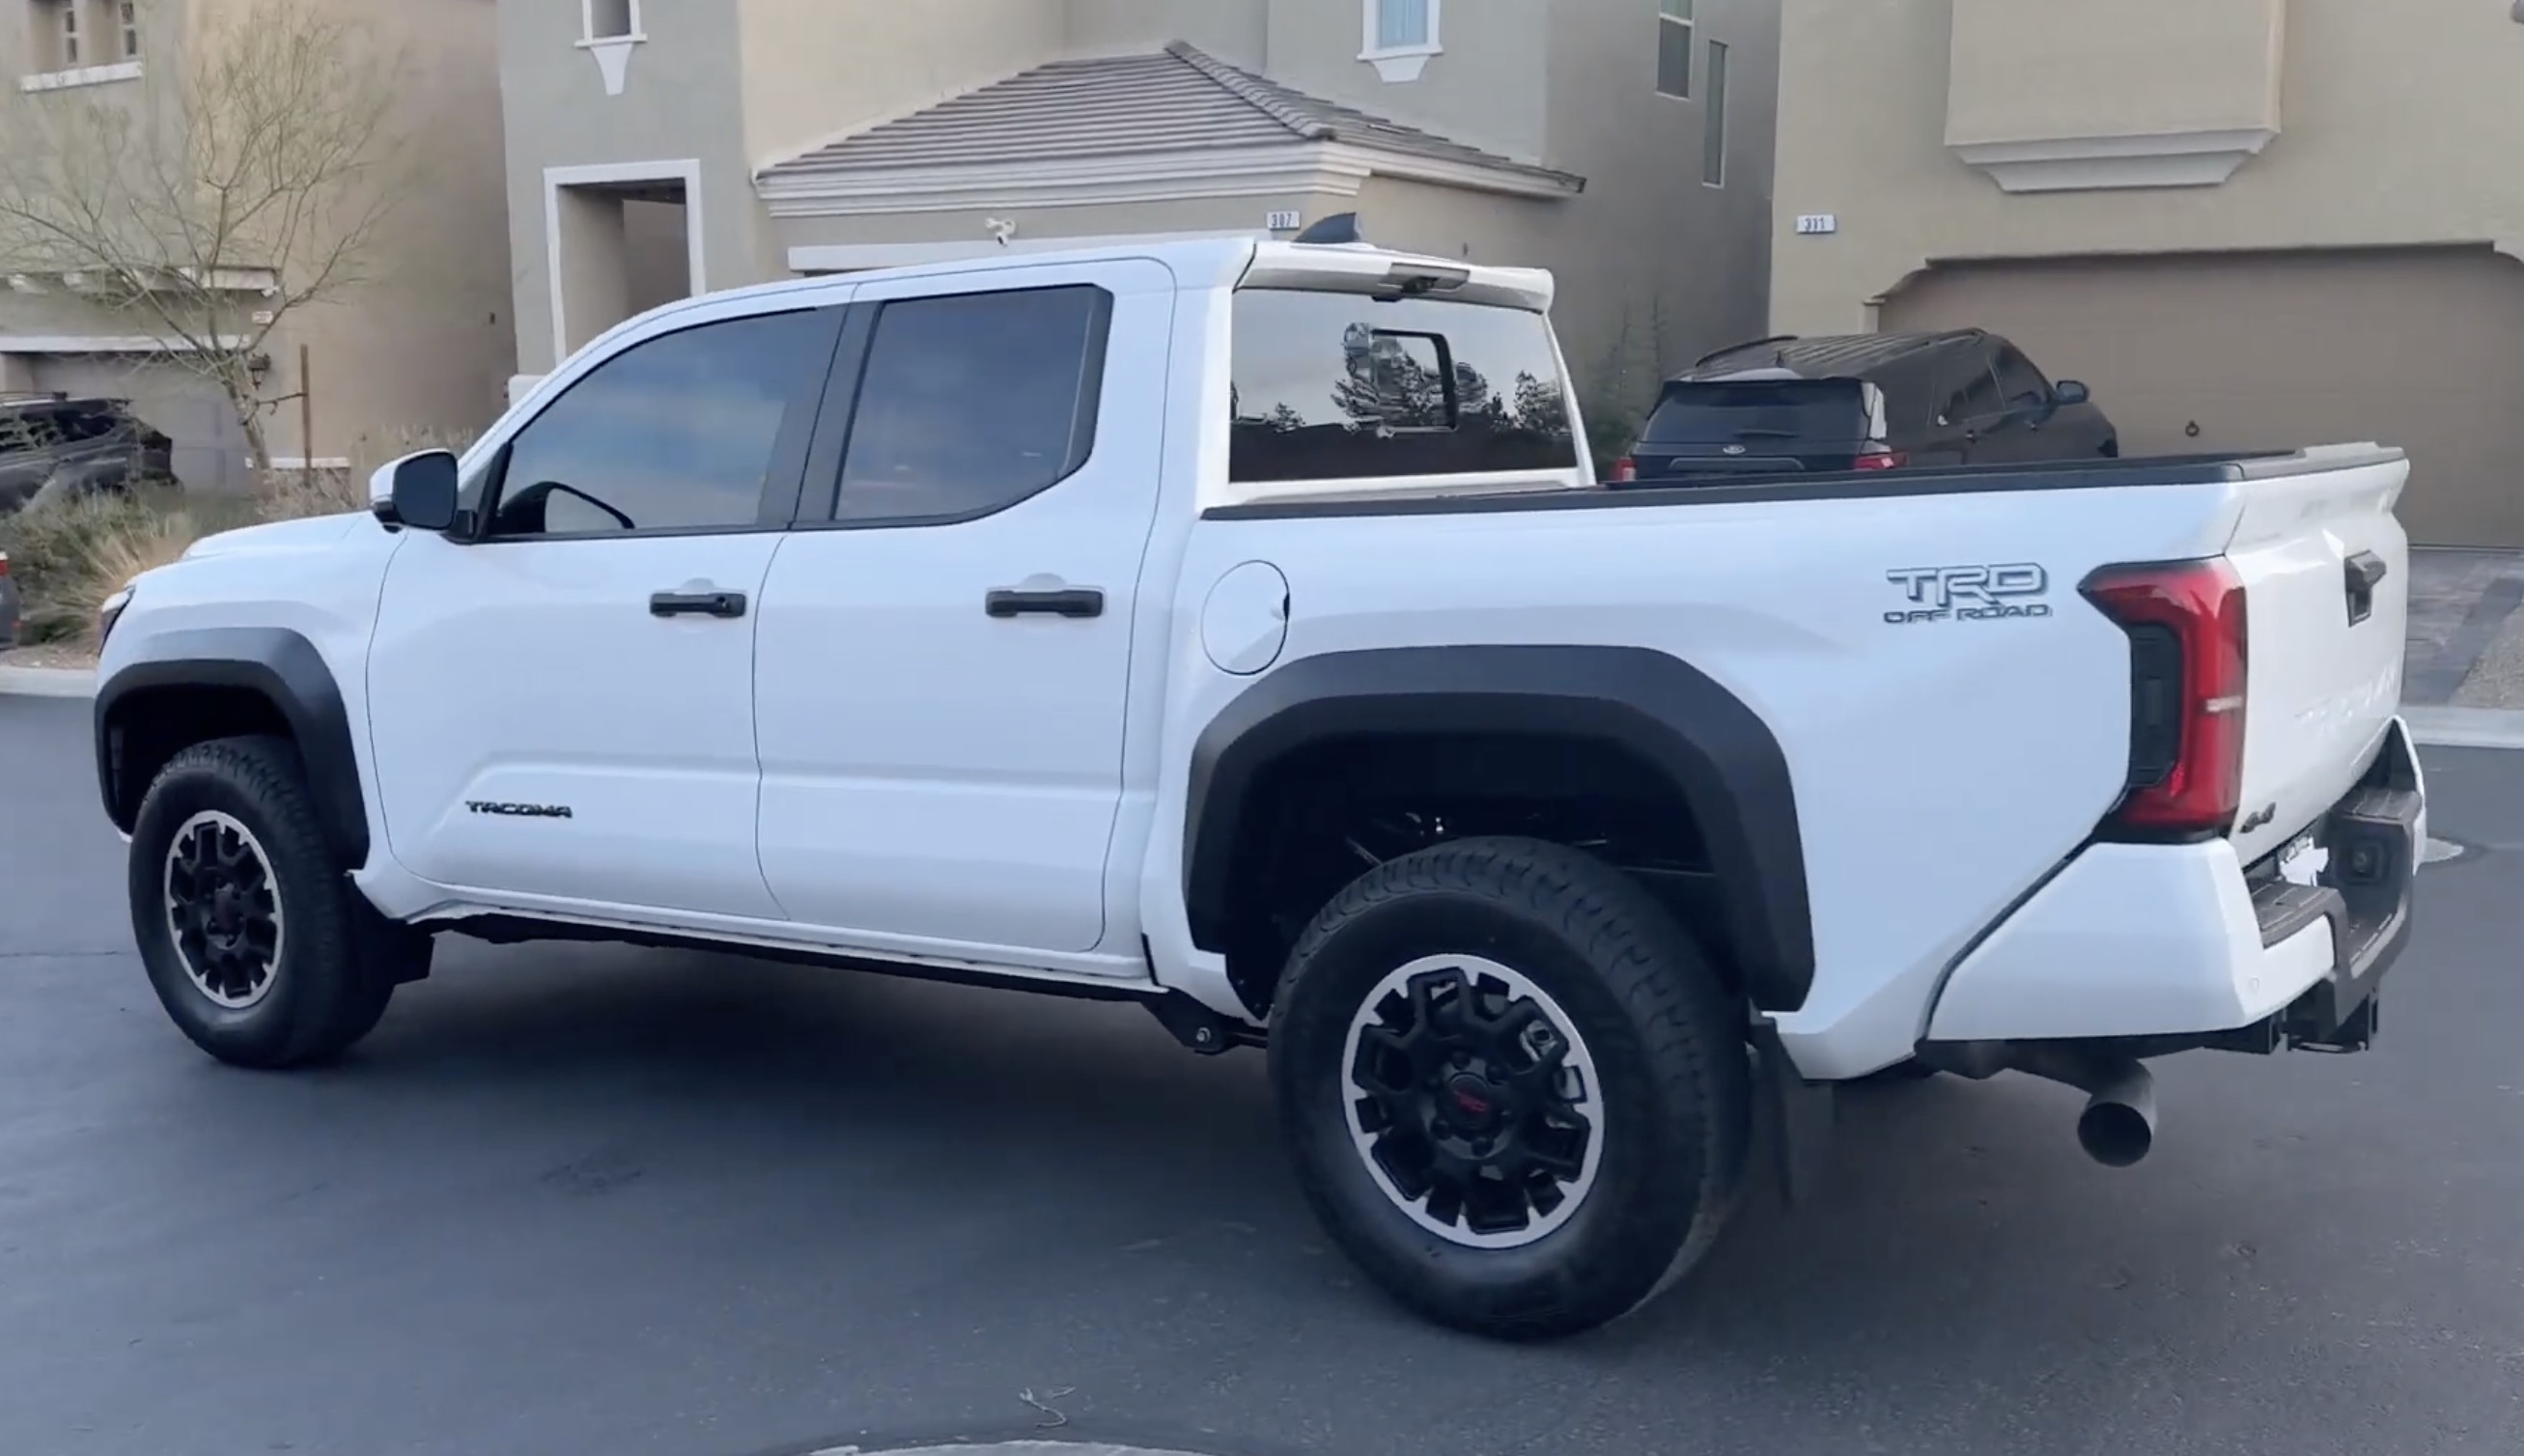 2024 Tacoma Official ICE CAP 2024 Tacoma Thread (4th Gen) 2024 tacoma 15%  40% window tint before & after ceramic tints